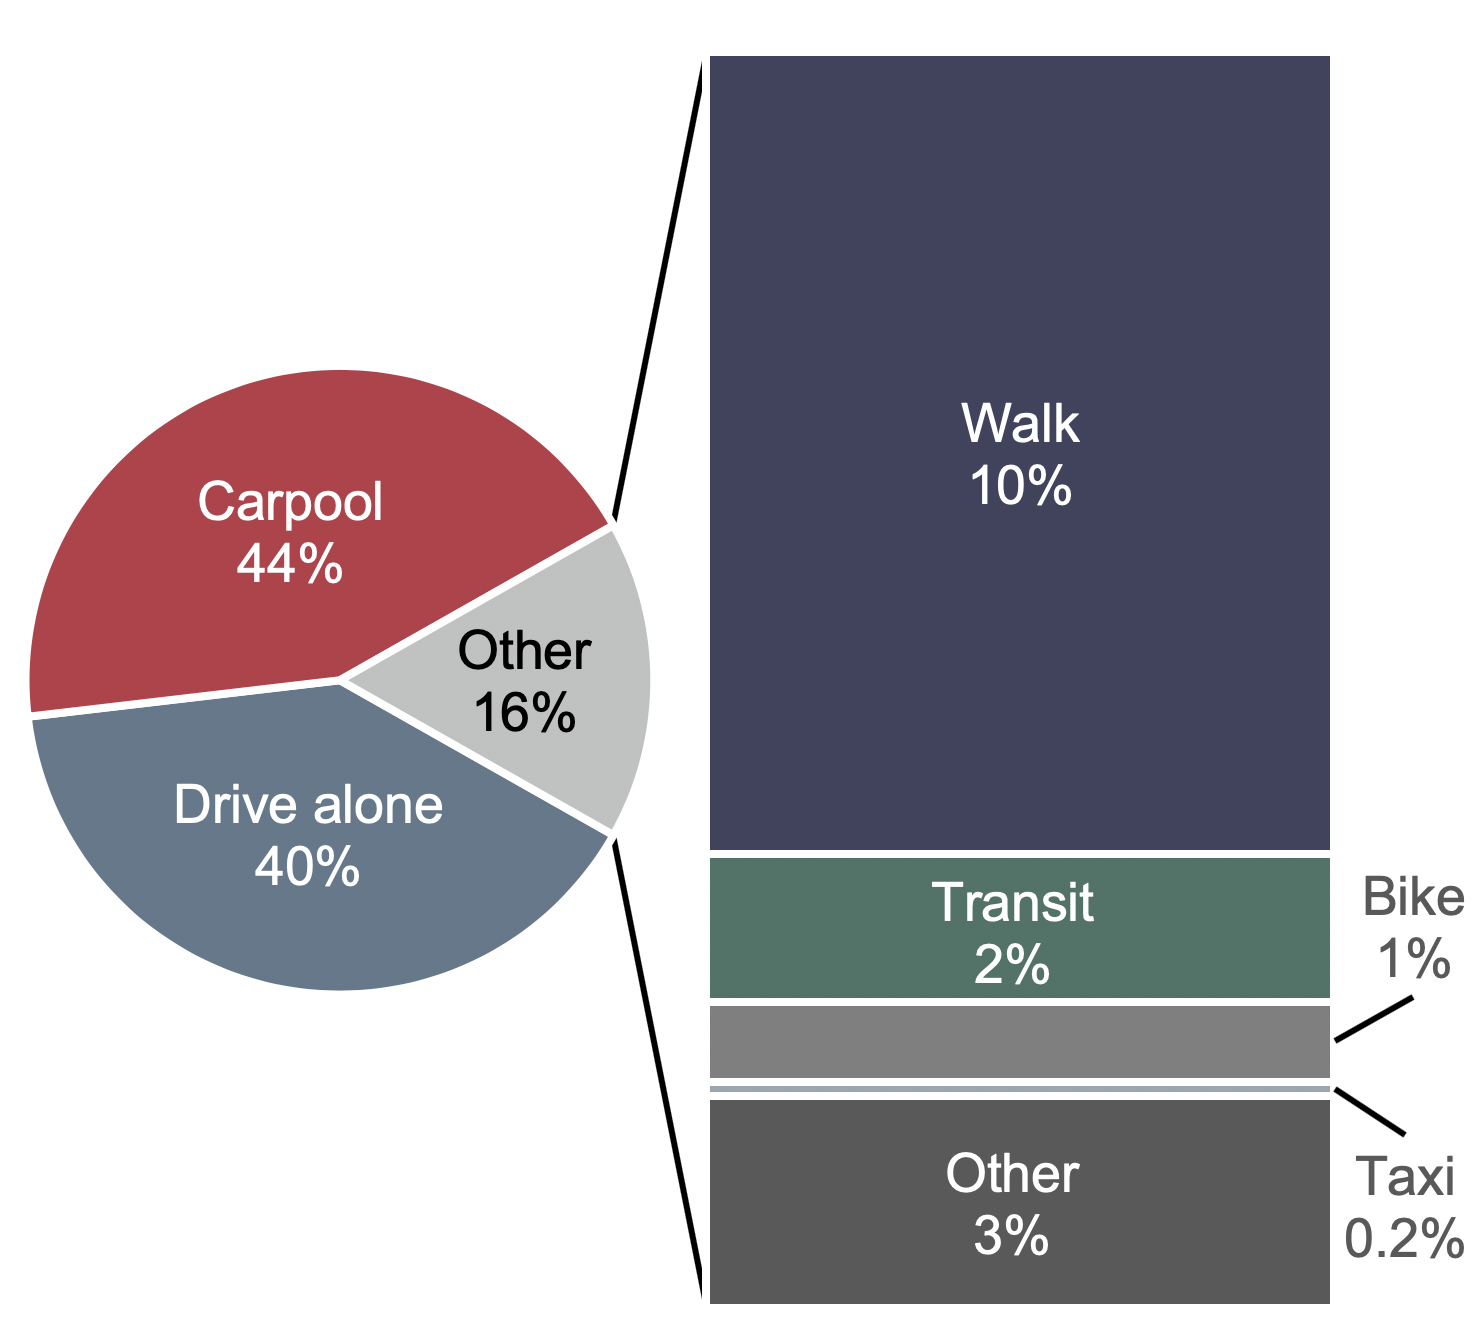 A pie chart shows the percentages of person trips made by multiple transportation modes. Driving alone accounts for 40 percent of trips, carpooling for 44 percent, and other modes for 16 percent. The “Other” category is further subdivided, with 10 percent being from walking, 2 percent from transit, 1 percent from biking, 0.2 percent from taxis, and 3 percent from other. Source: National Household Travel Survey 2009.